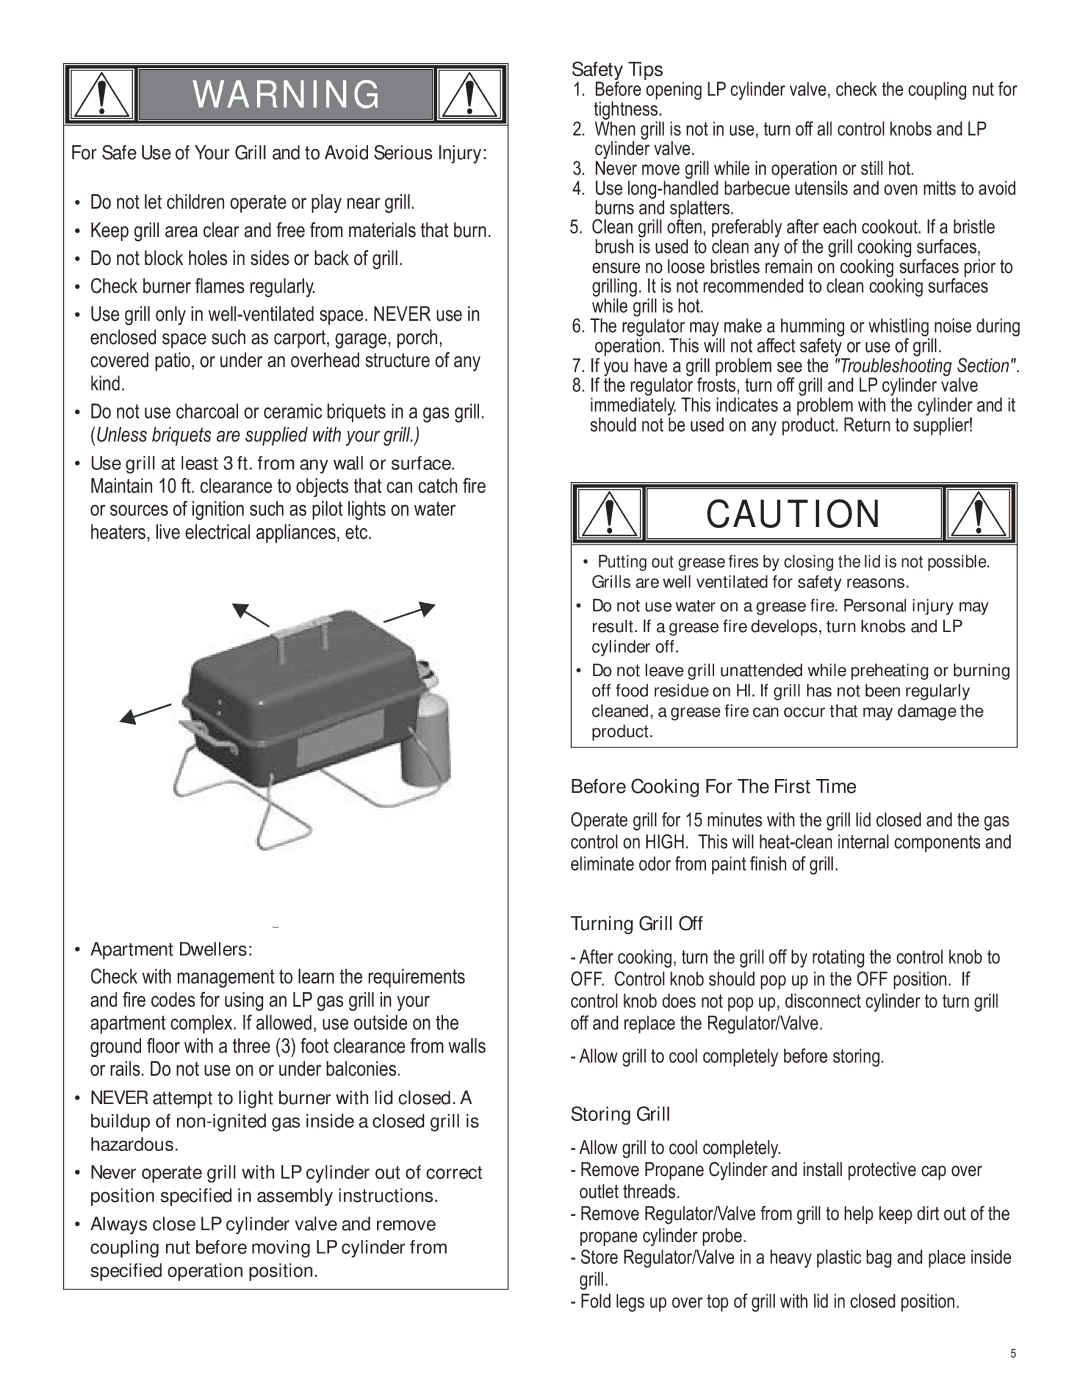 Char-Broil 4651330 For Safe Use of Your Grill and to Avoid Serious Injury, Safety Tips, Before Cooking For The First Time 